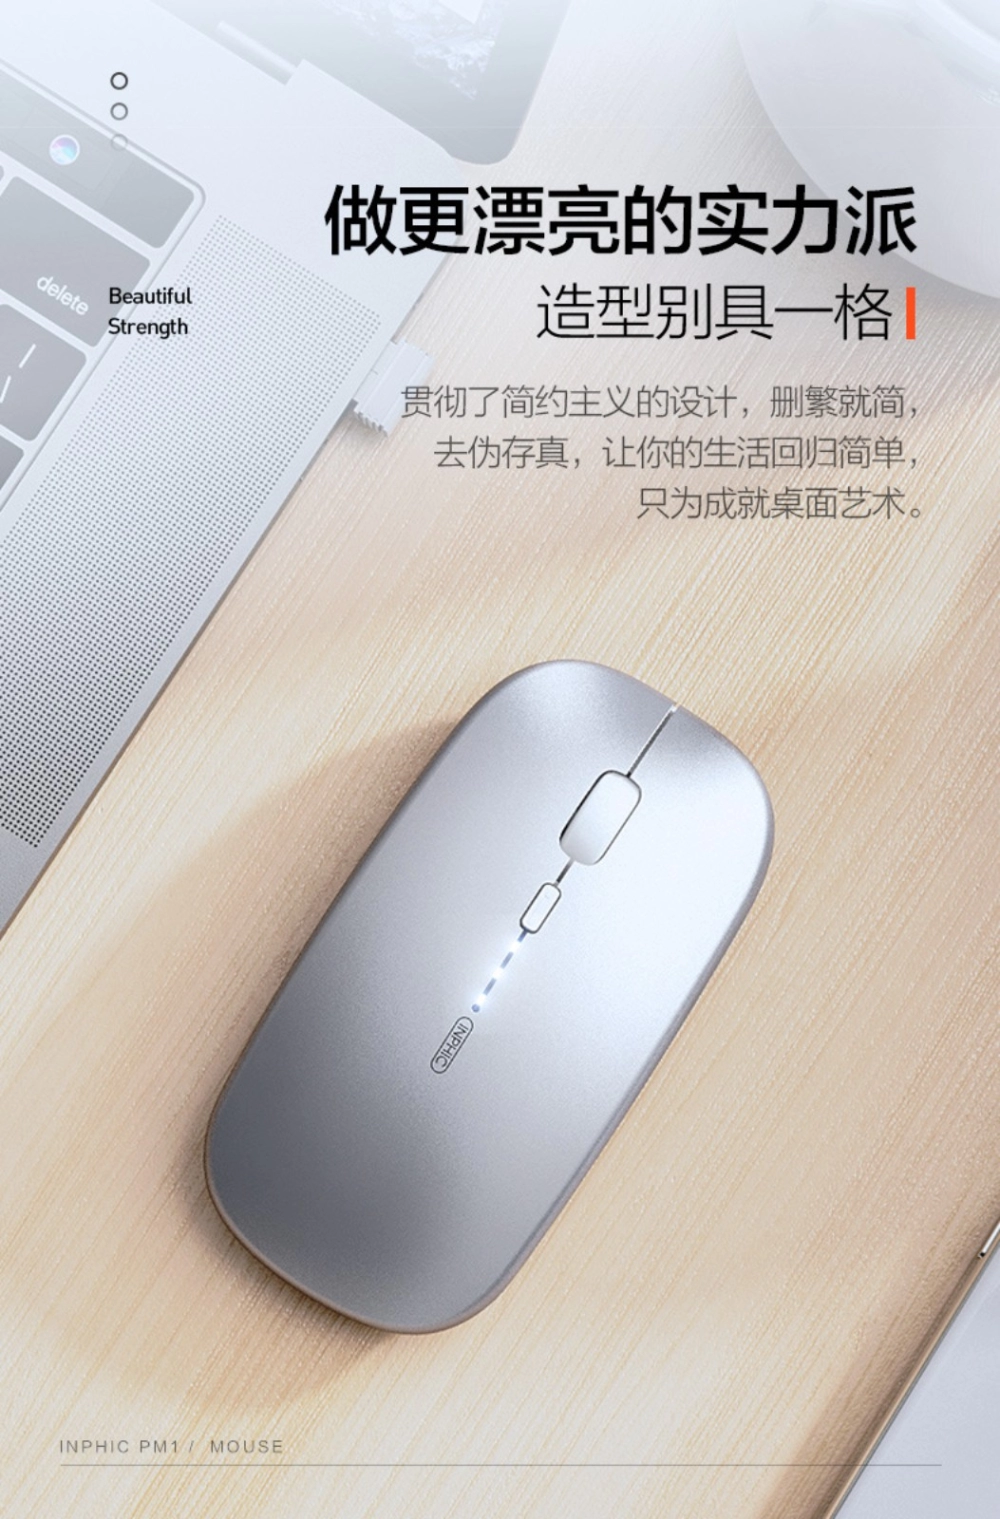 INPHIC PM1 2.4G WIRELESS MATTE MOUSE